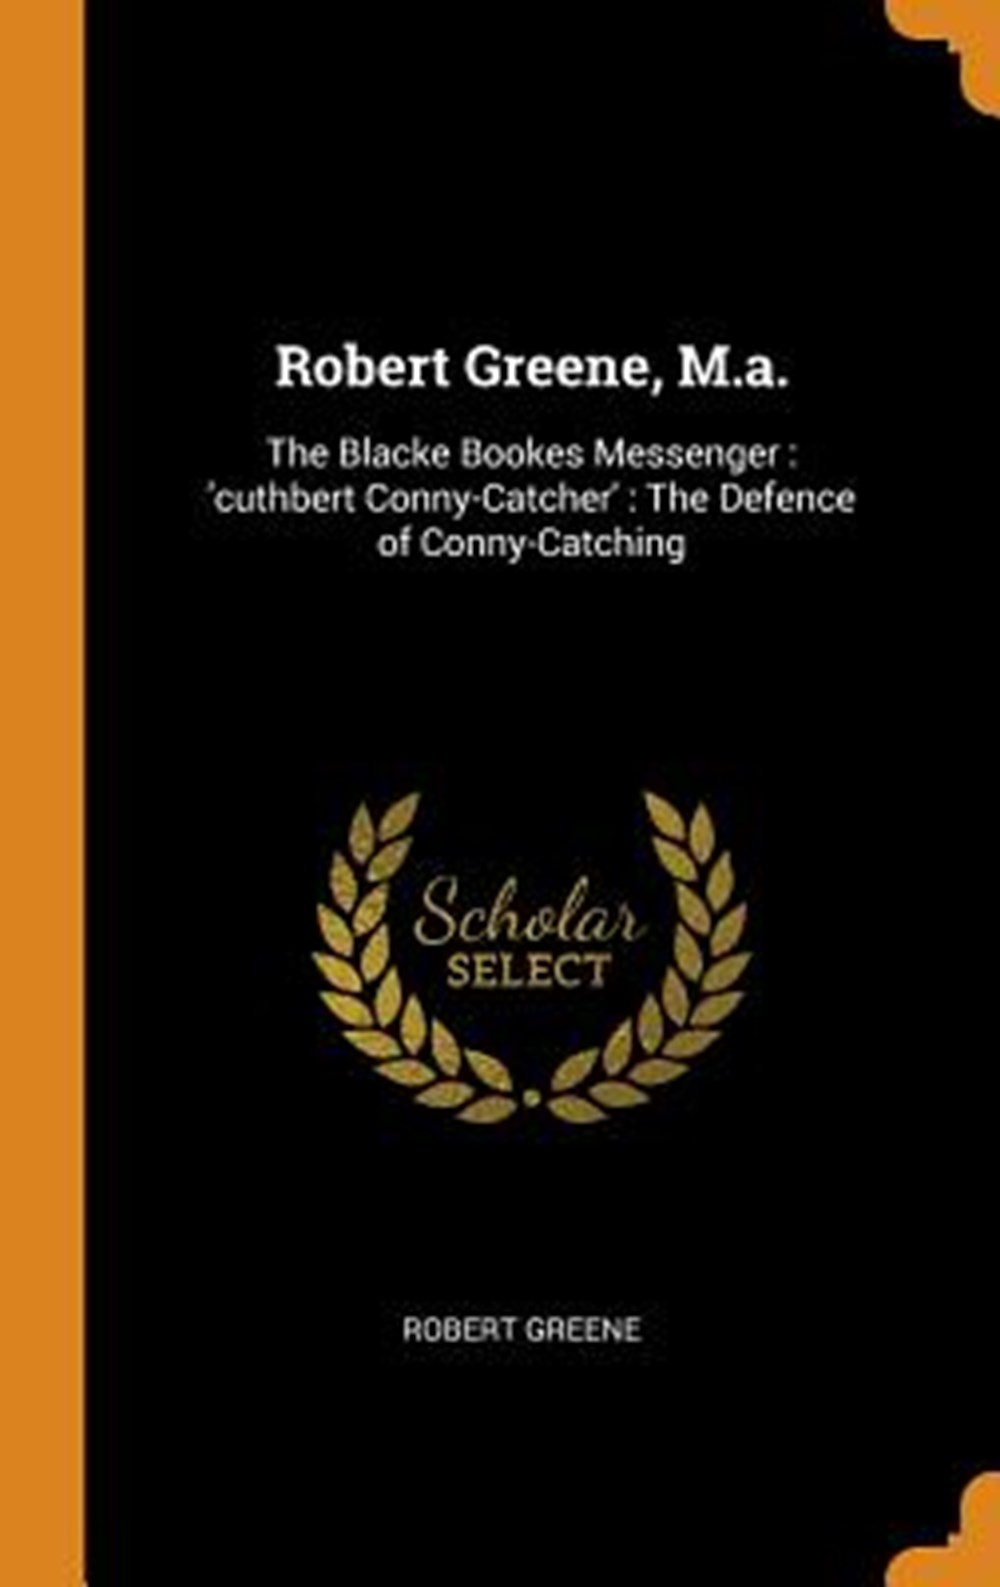 Robert Greene, M.A. The Blacke Bookes Messenger: 'cuthbert Conny-Catcher': The Defence of Conny-Catc